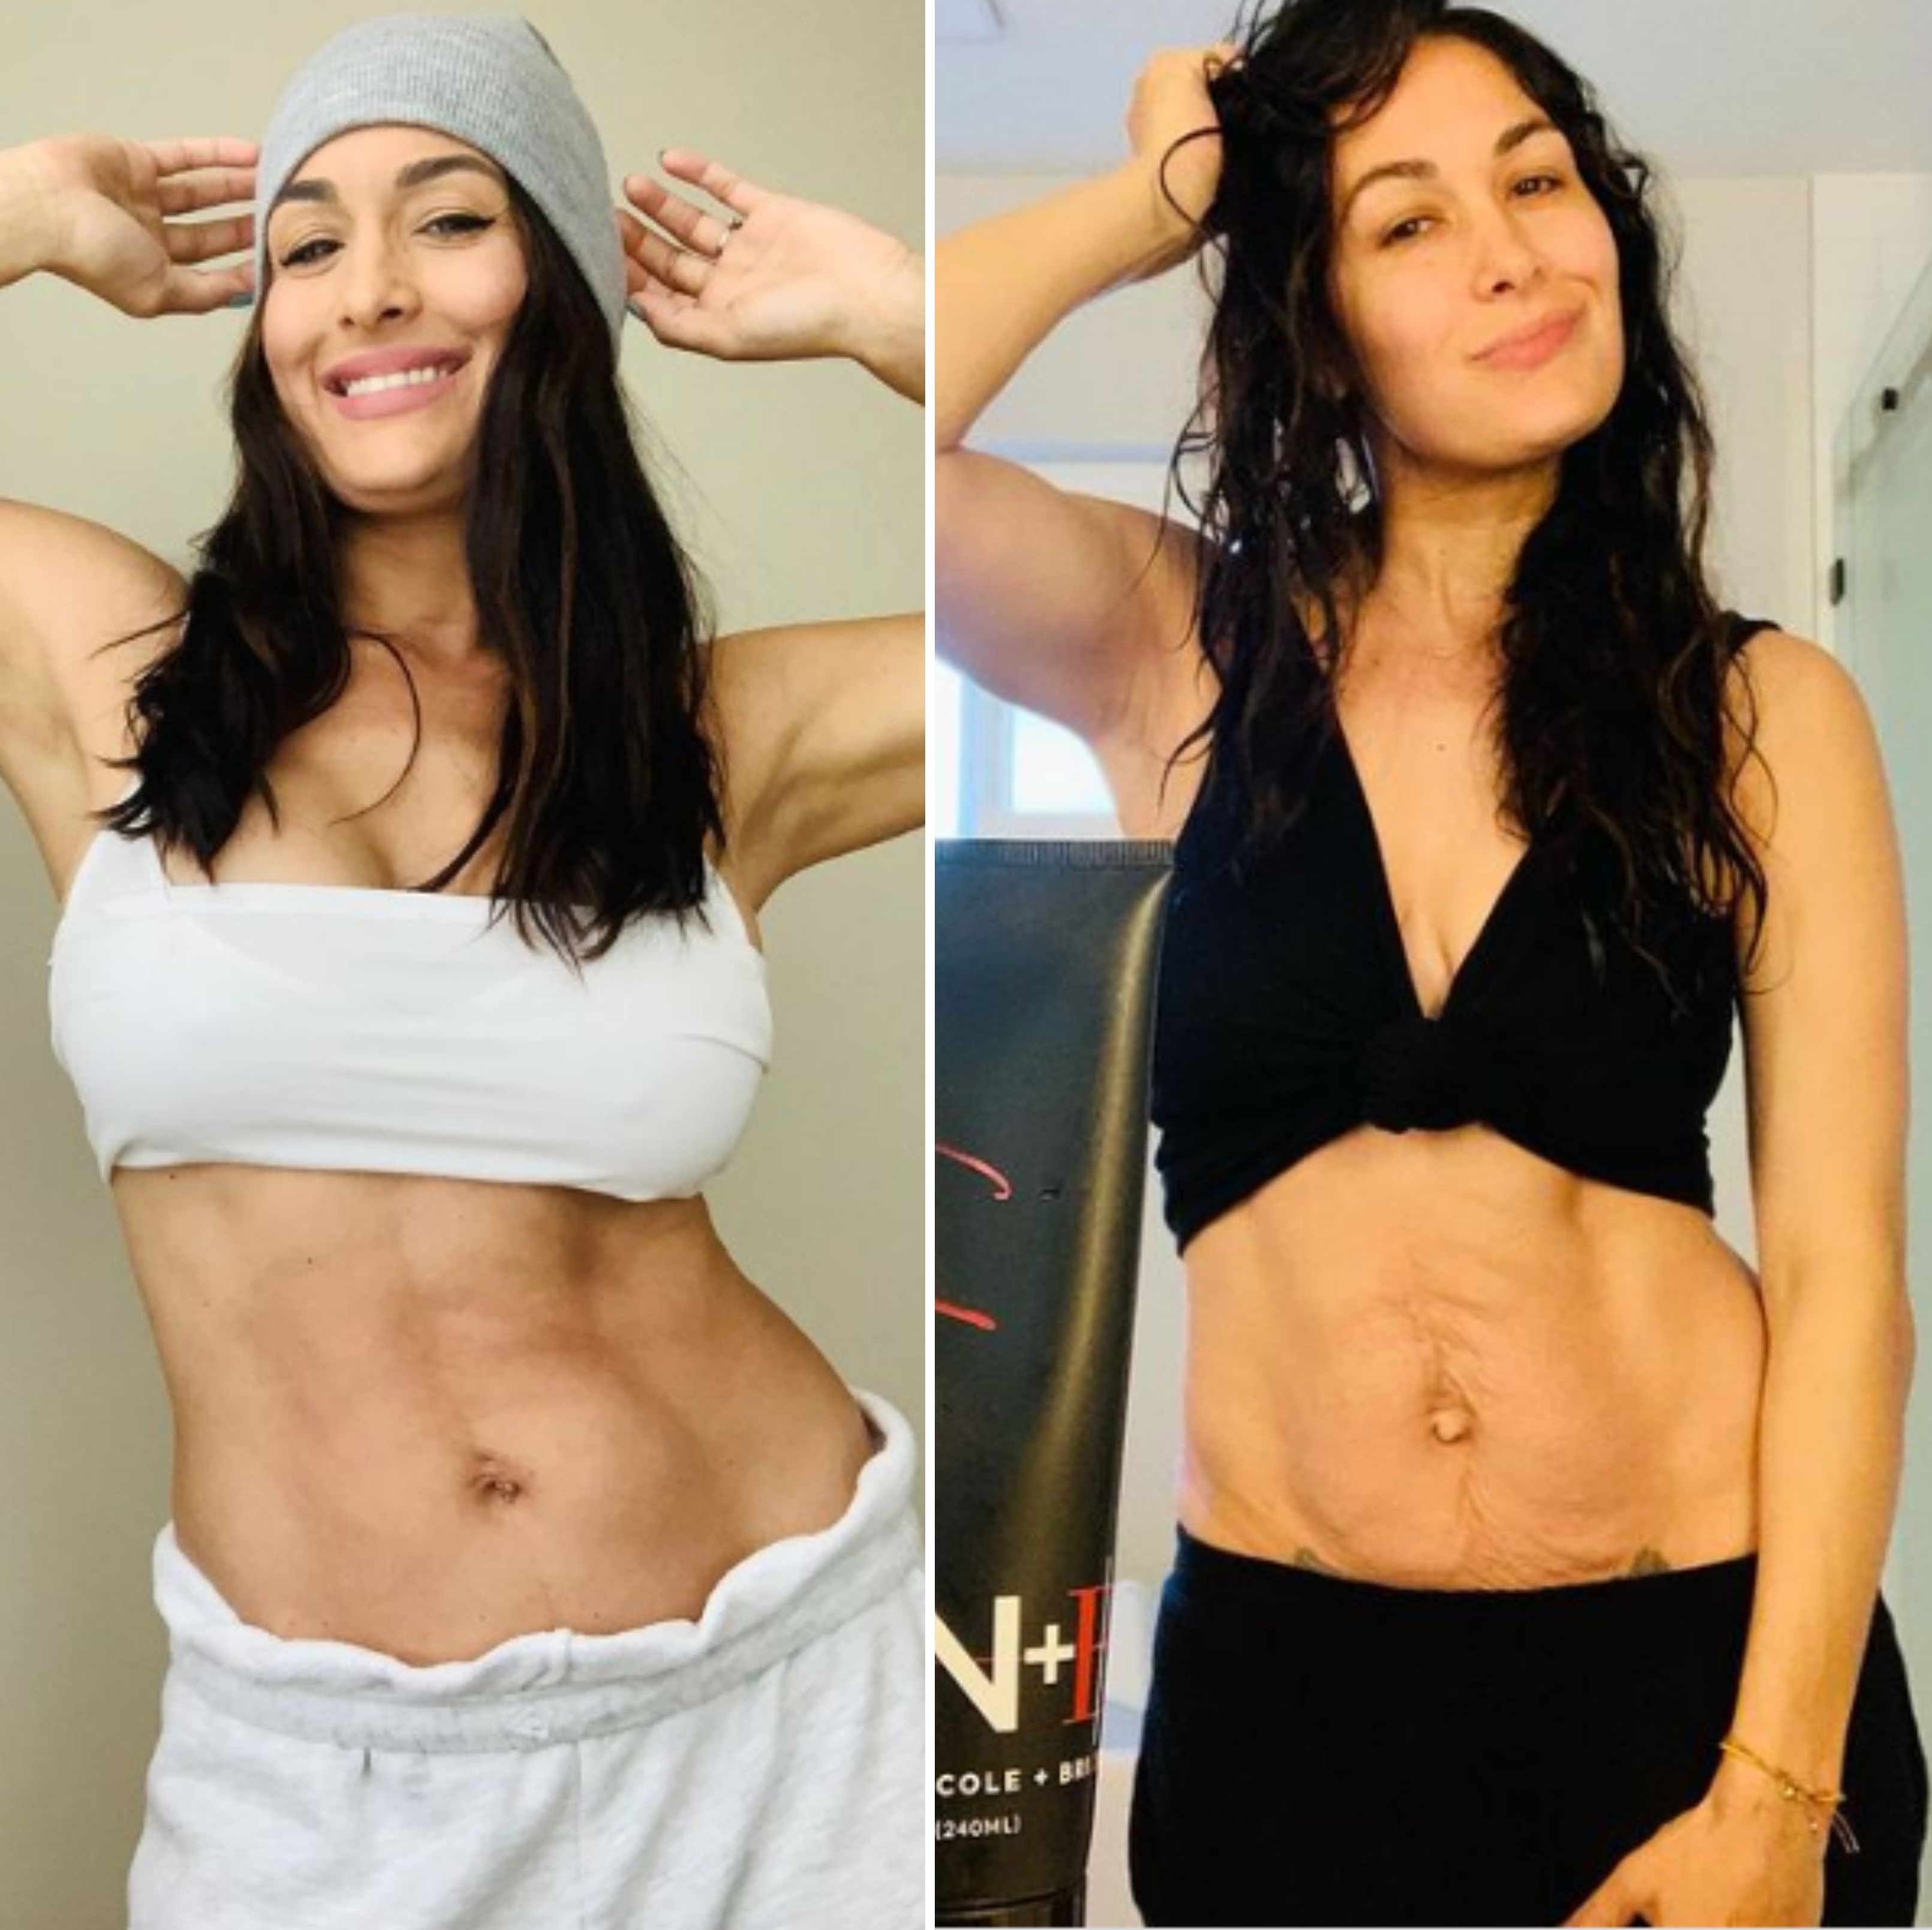 Nicki Bella Sexy Teen Xxxvideo - Nikki and Brie Bella's Post-Baby Bodies: Photos After Welcoming Sons